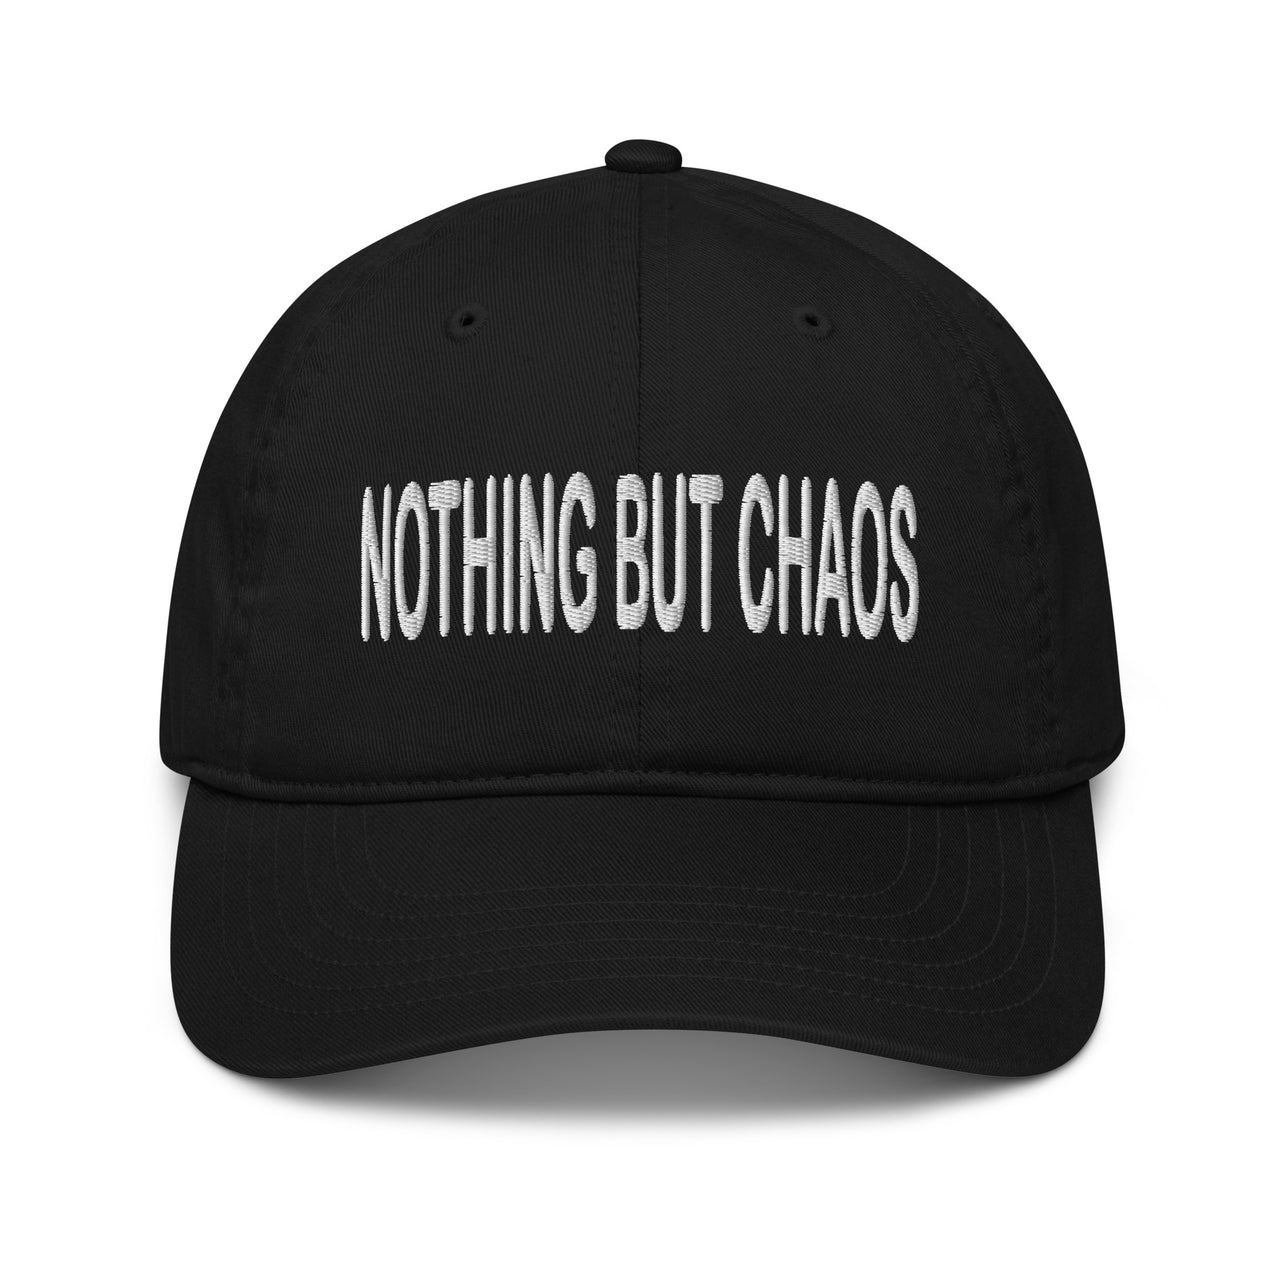 Nothing But Chaos Cotton Cap